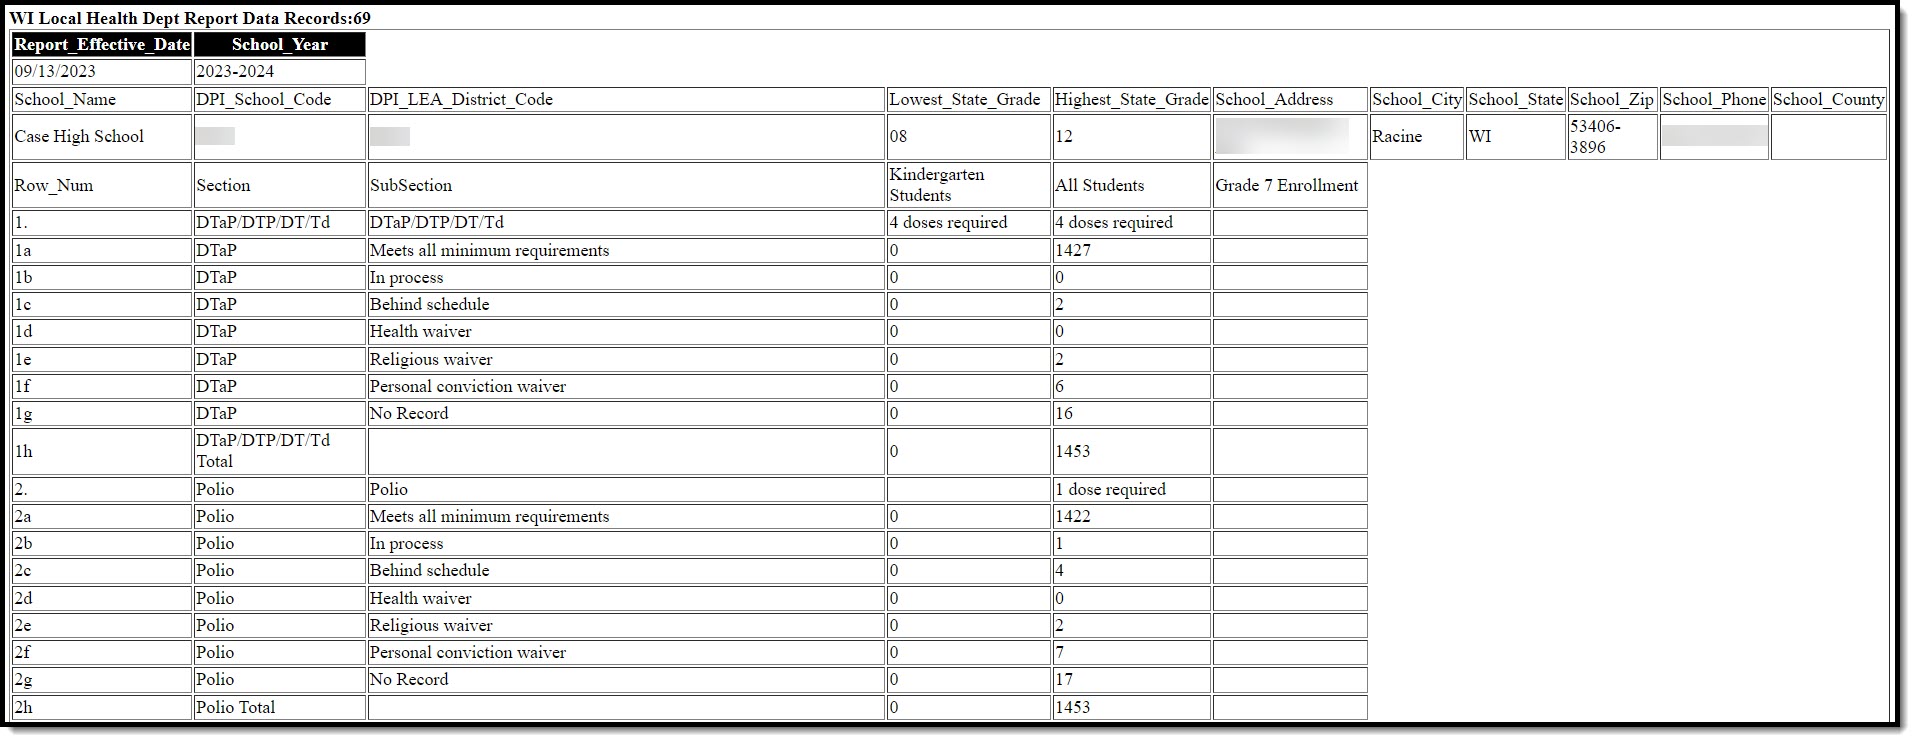 Screenshot of the local health department report in HTML displaying the header, DTaP, and Polio rows.